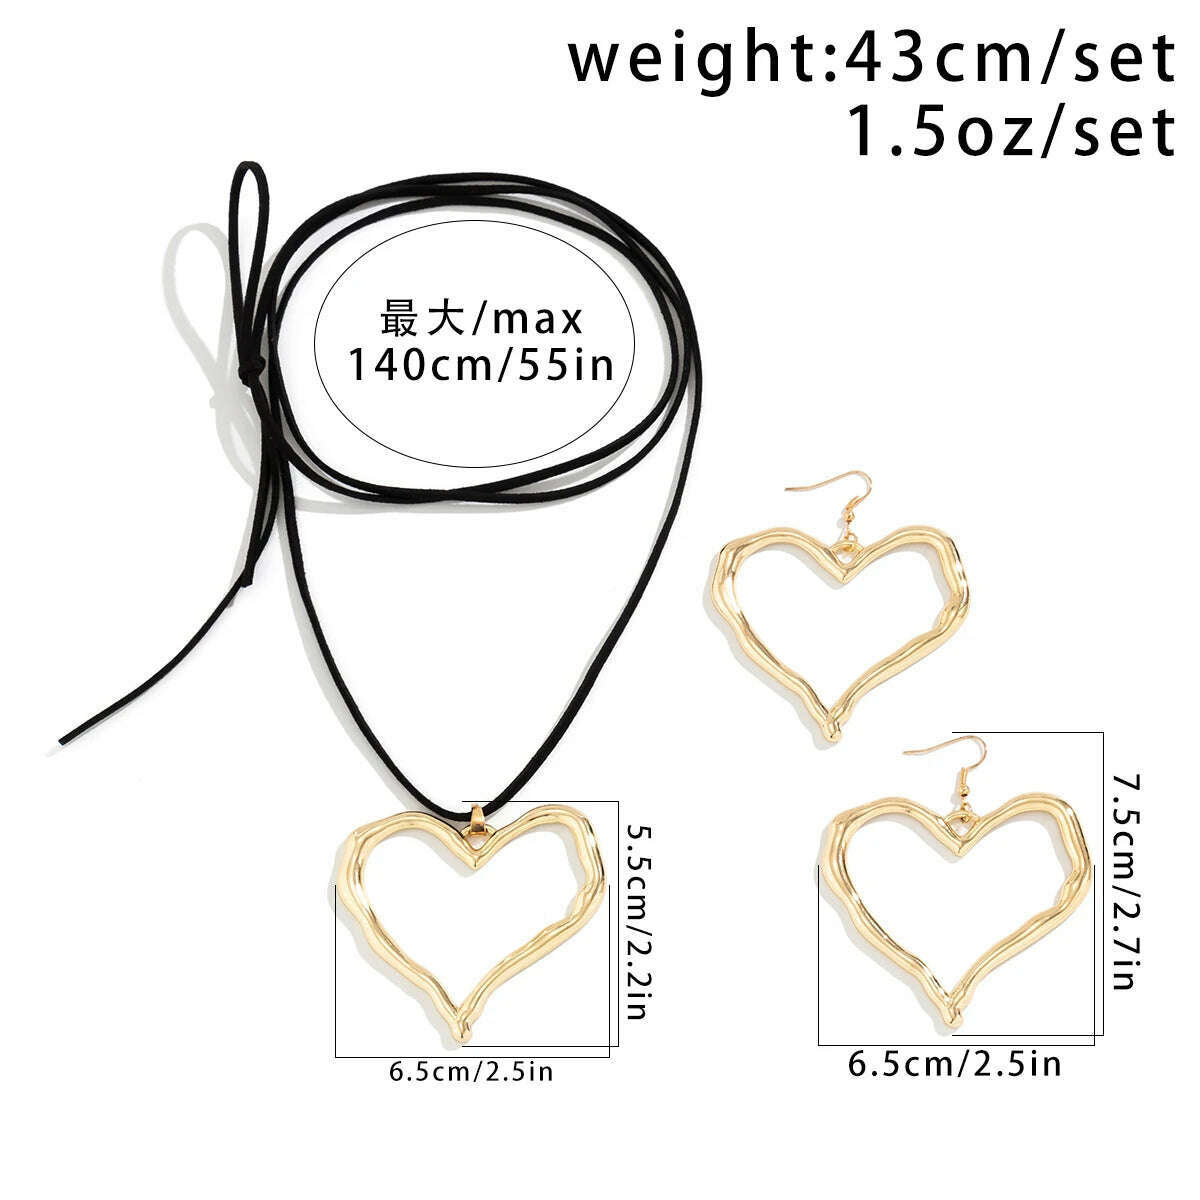 KIMLUD, 2Pcs/Set Exaggerated Big Hollow Love Heart Pendant Choker Necklace Bracelet for Women Adjustable Rope Chain Y2K Jewelry Set Gift, KIMLUD Womens Clothes